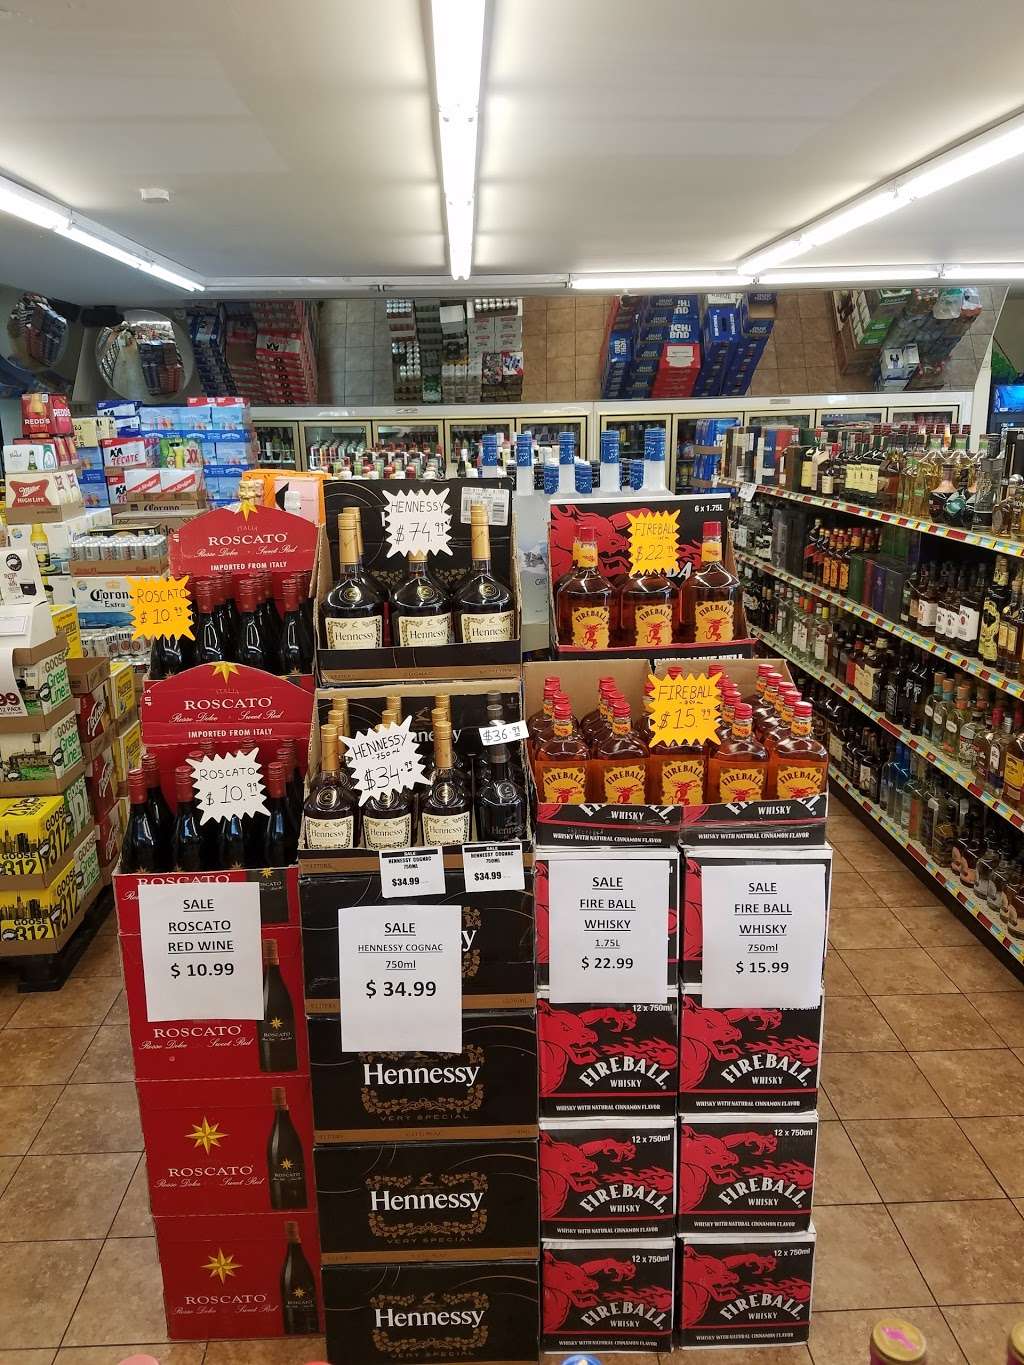 Parkway Pantry Liquor & Beer | 4N115 N Addison Rd, Addison, IL 60101 | Phone: (630) 782-2070